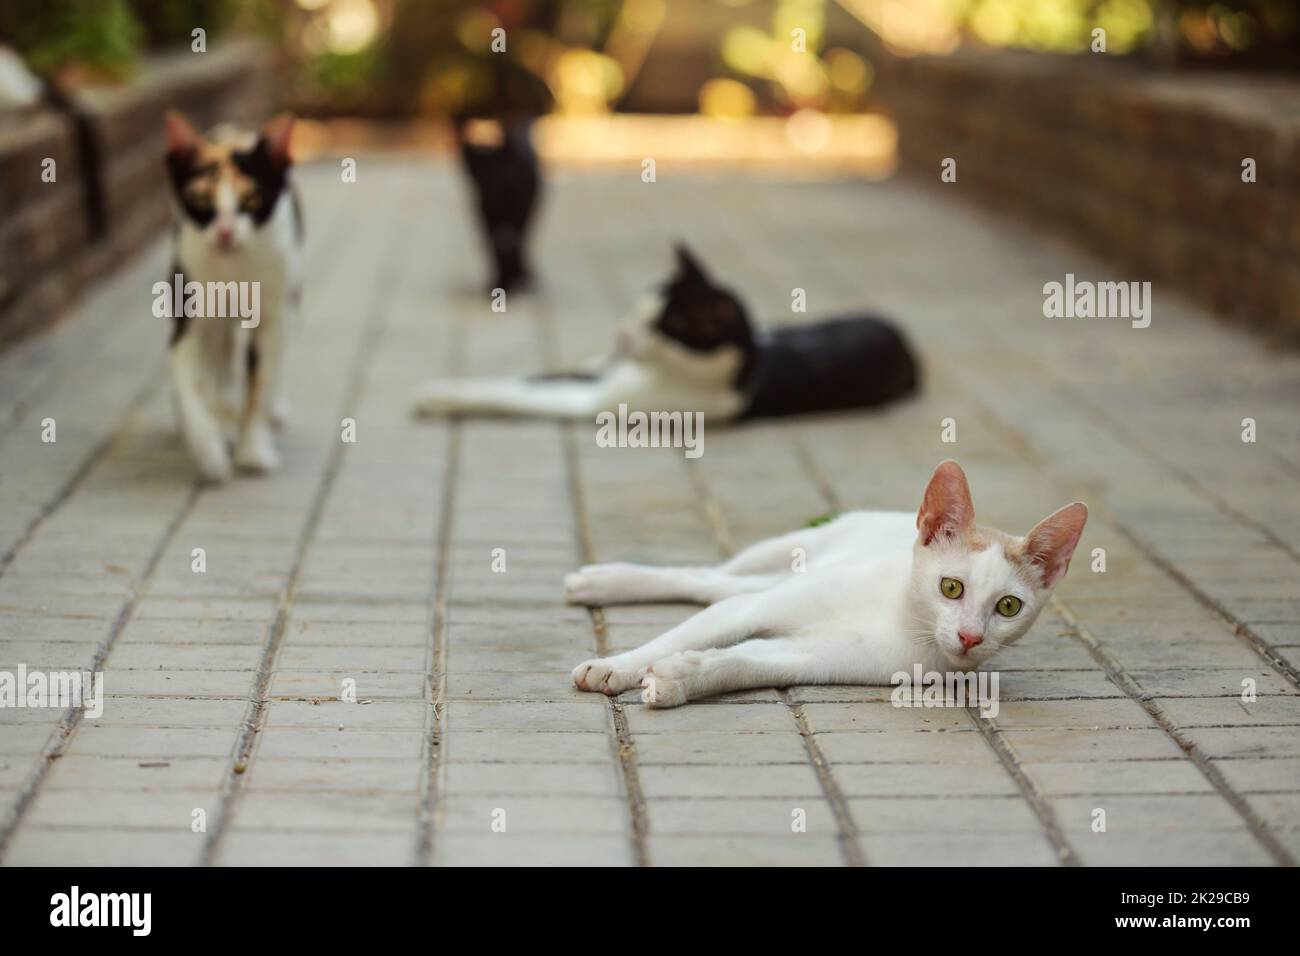 White stray cat laying on concrete pavement in hotel resort, more cats in background. Stock Photo